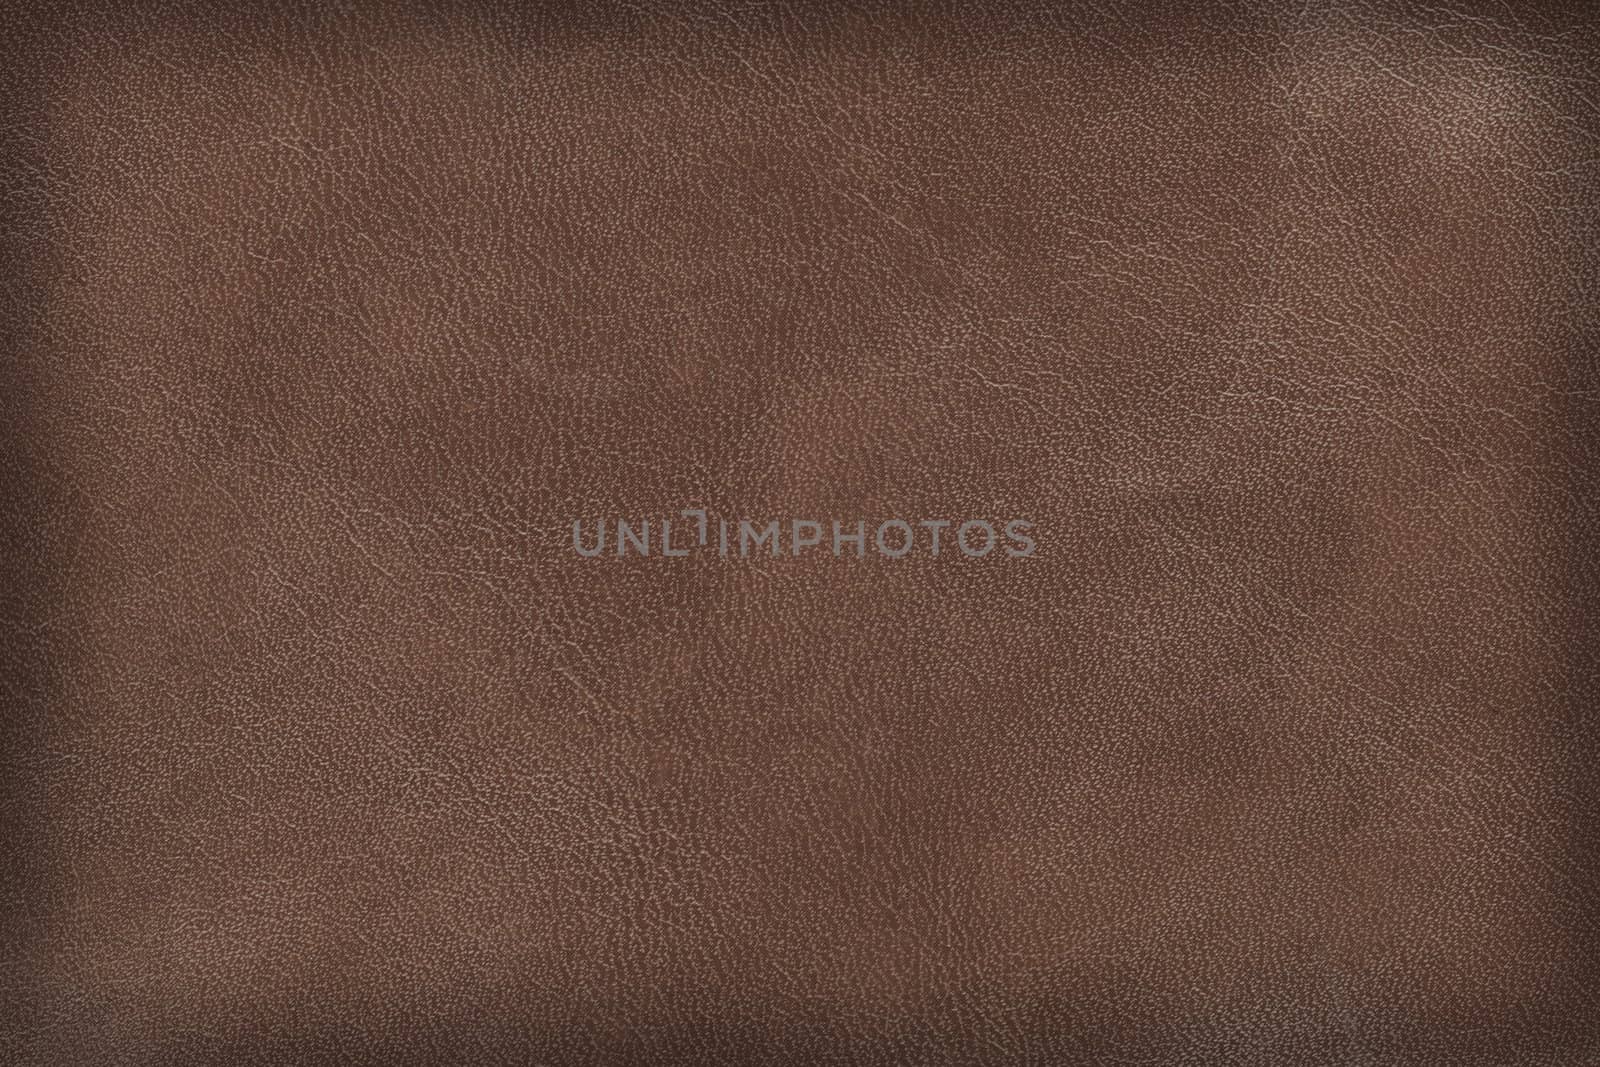 Brown leather texture. High-resolution scan.